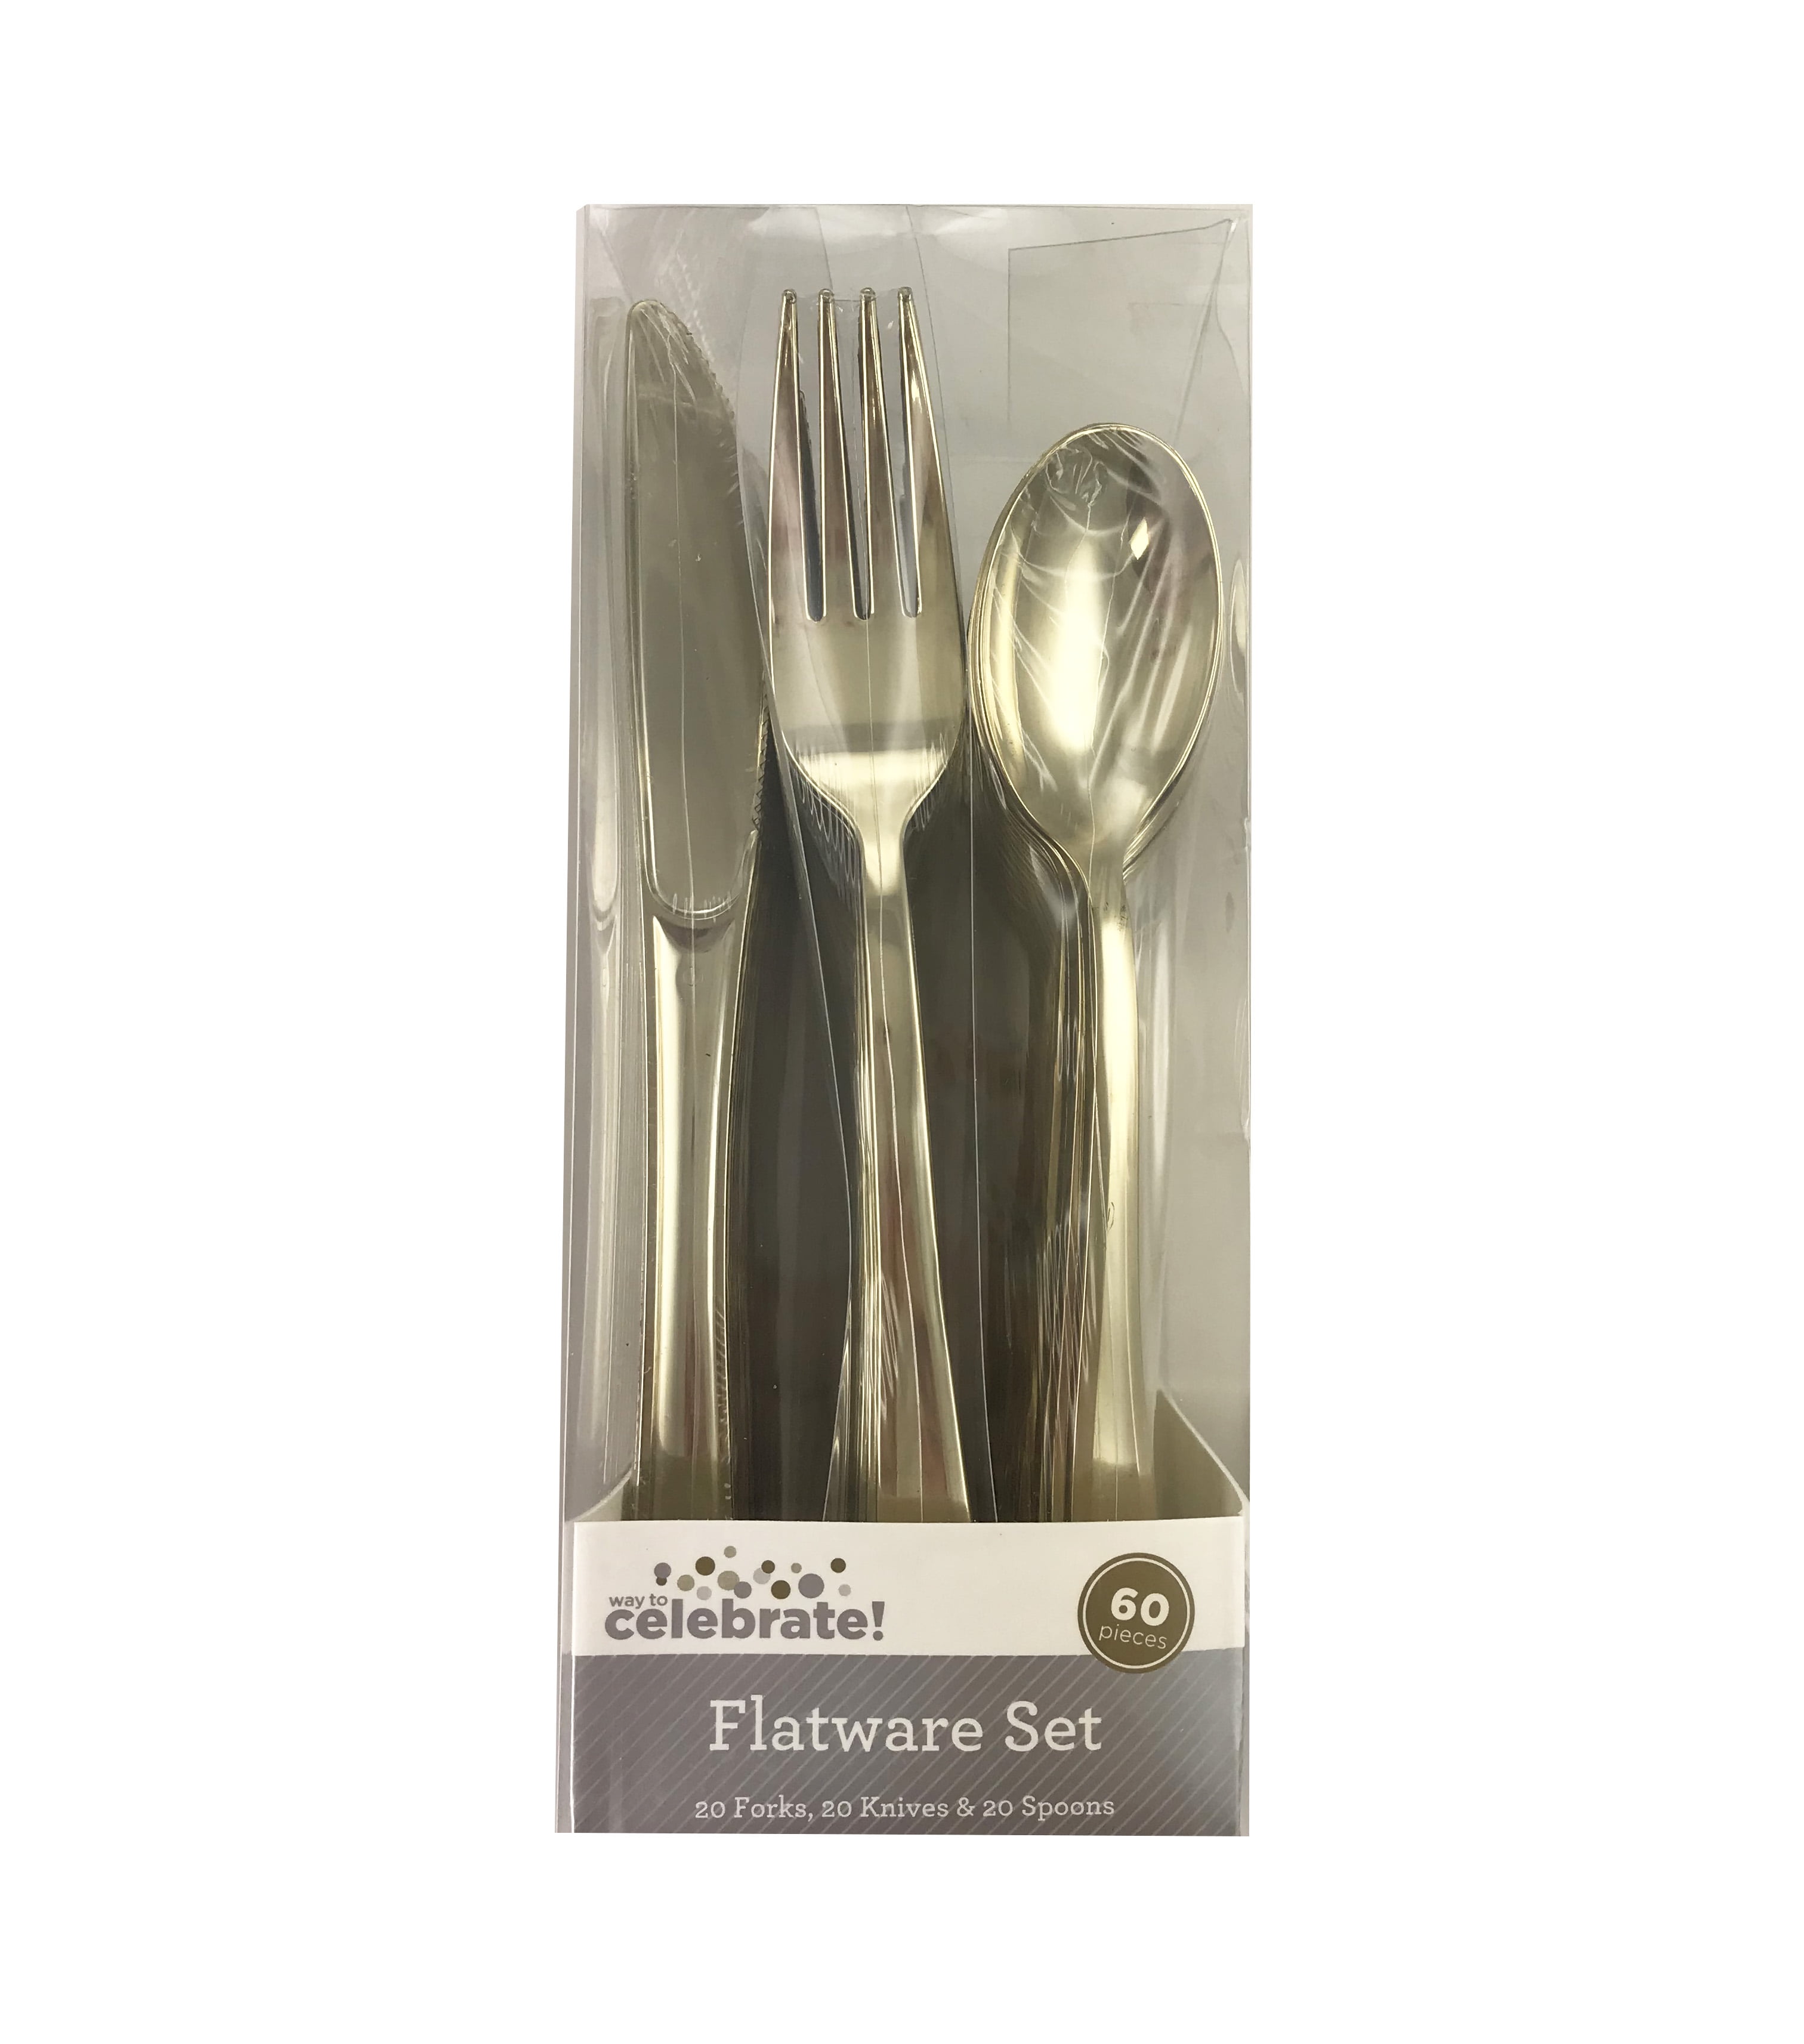 Sliver& Gold Cutlery Set in Wooden Box Family D 24 Piece Deluxe Stainless.S 